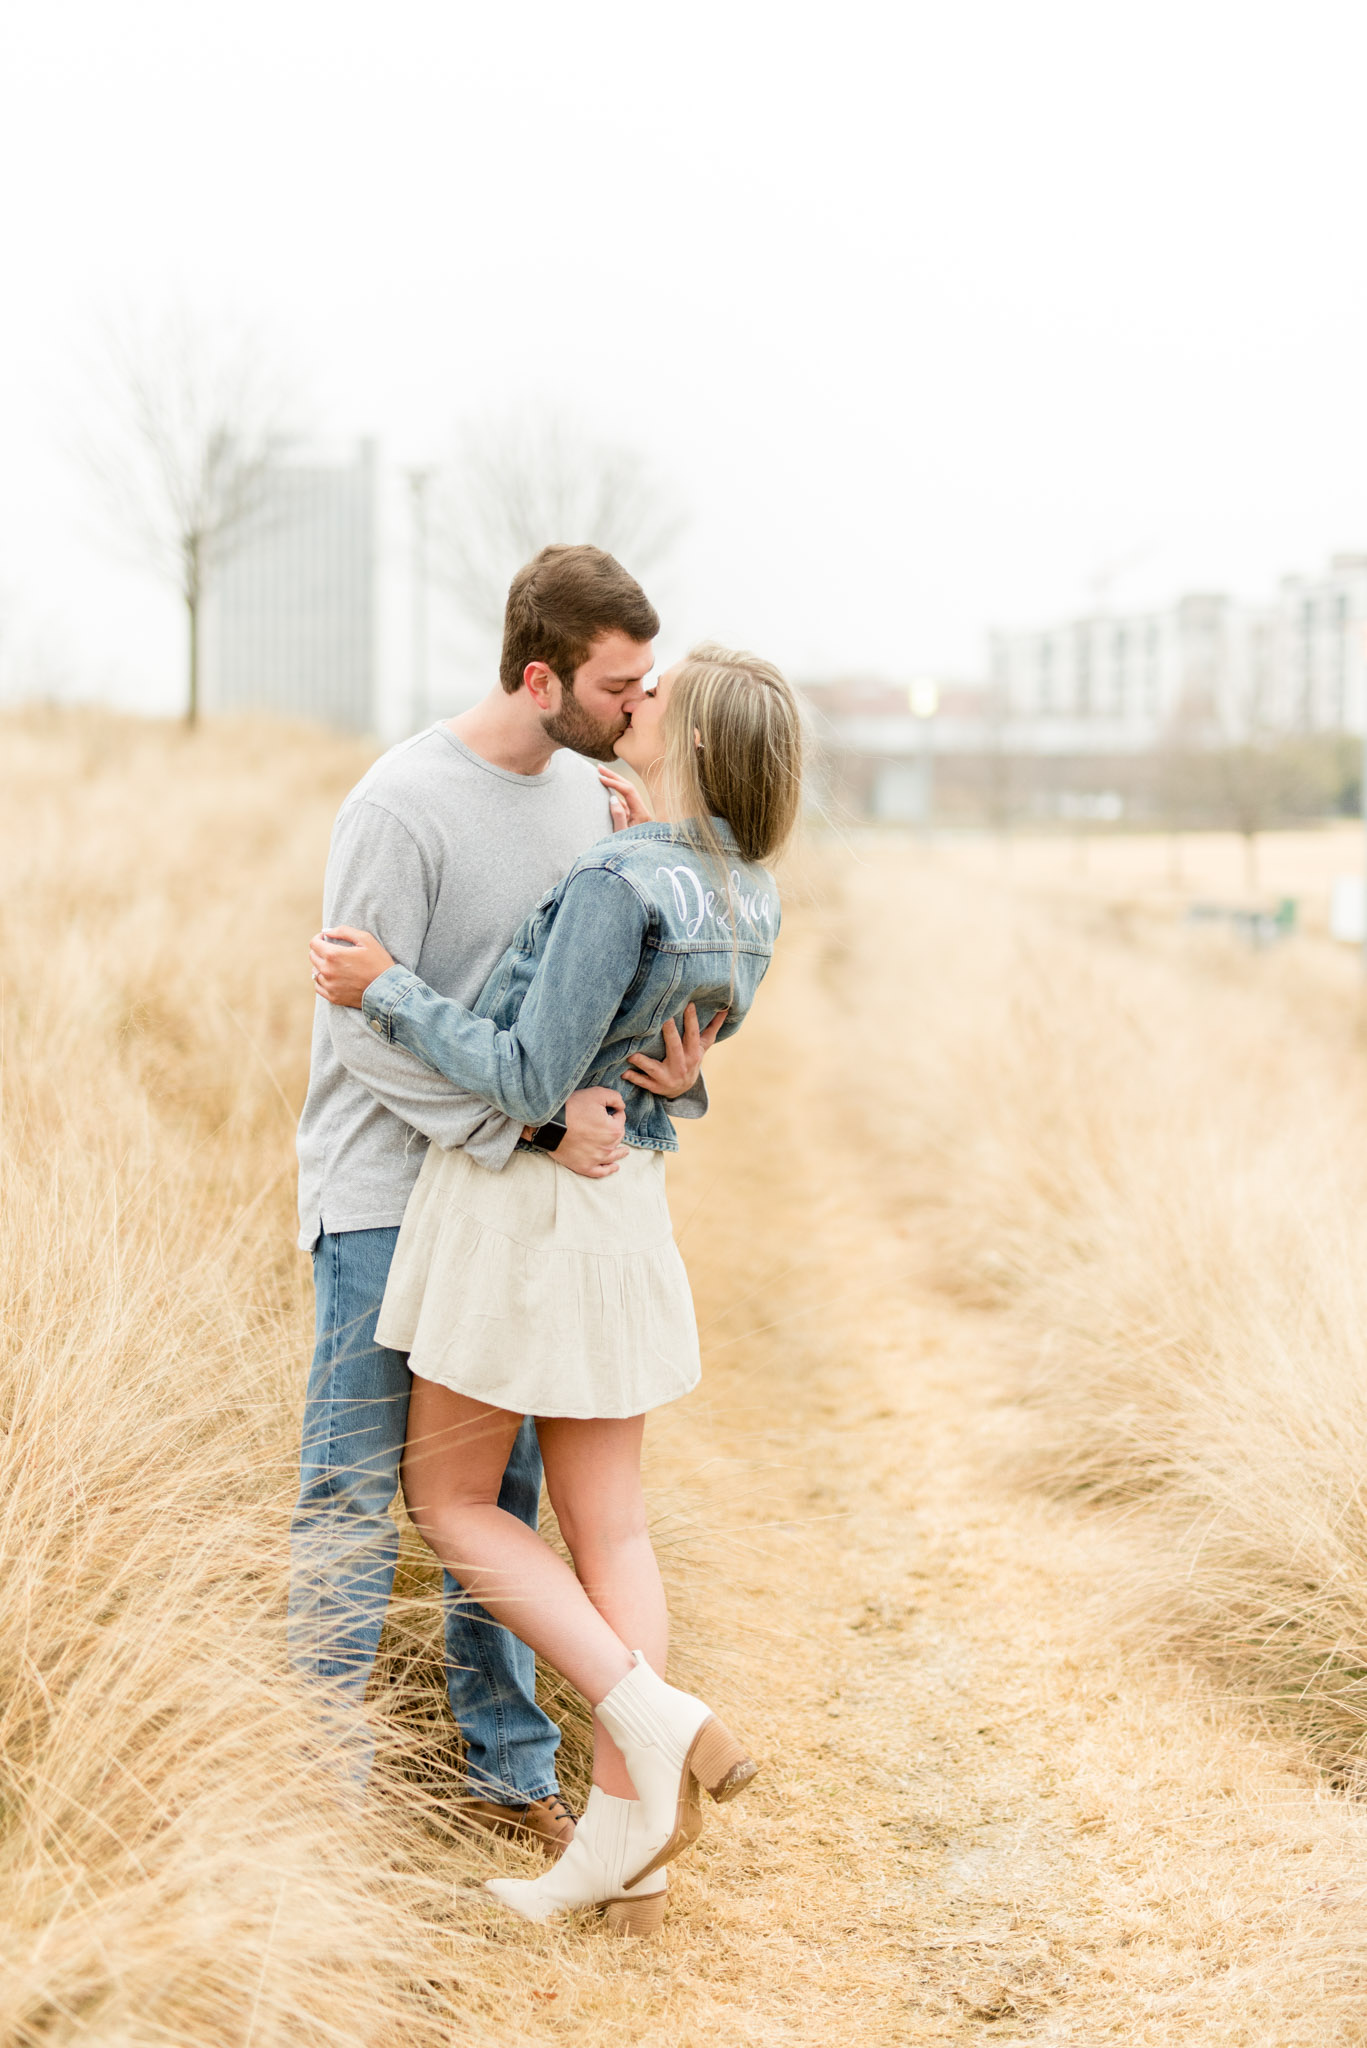 Couple kisses in tall grass field.